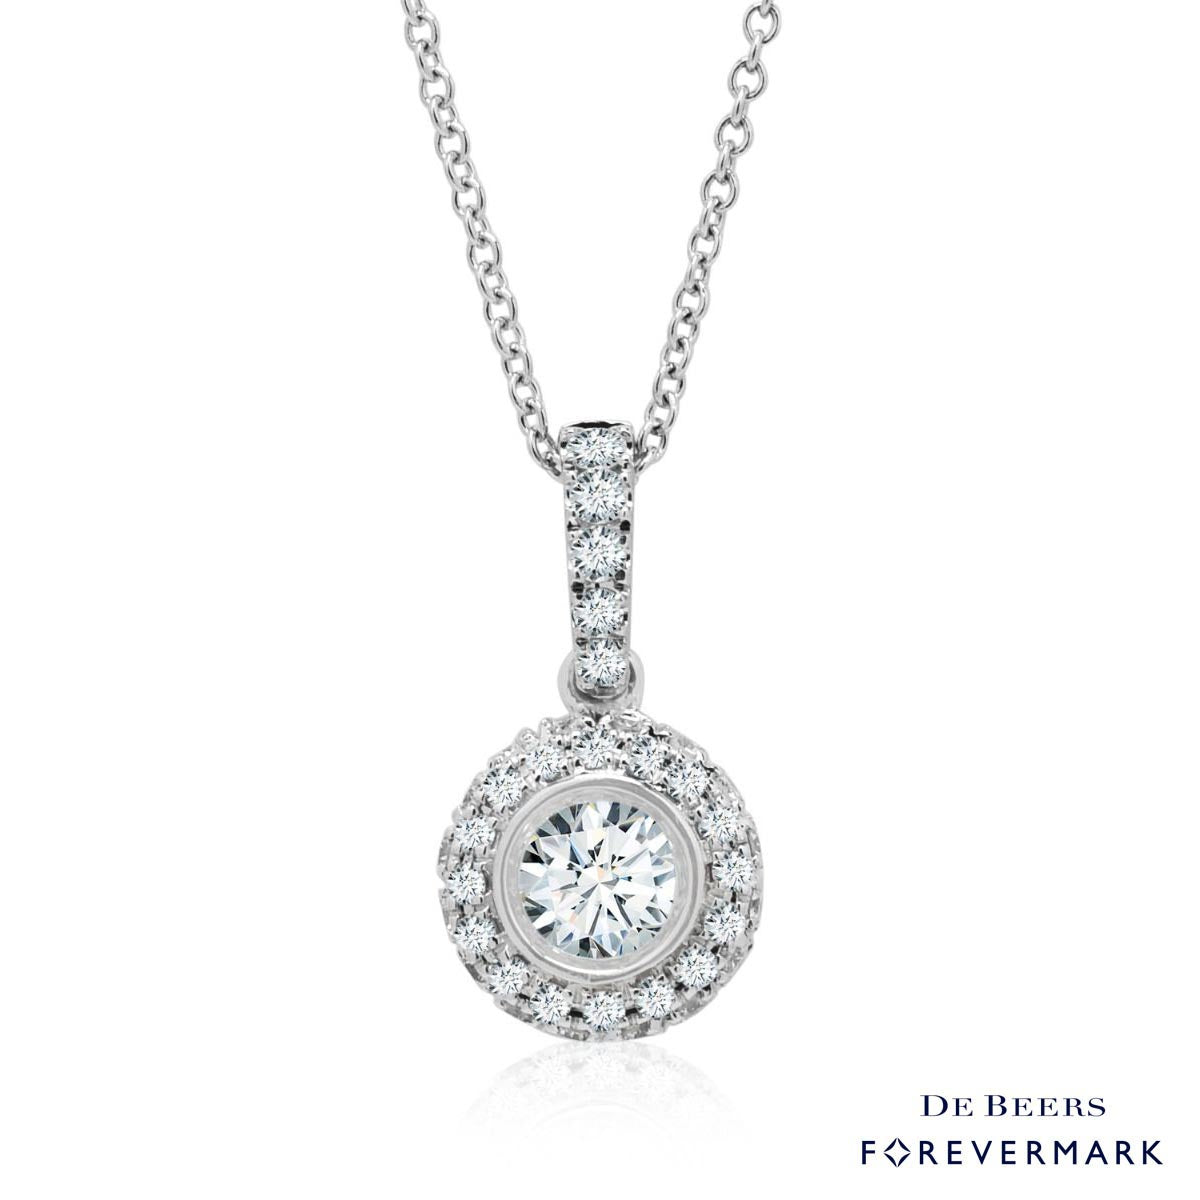 De Beers Forevermark Diamond Halo Necklace in 18kt White Gold (3/8ct tw)